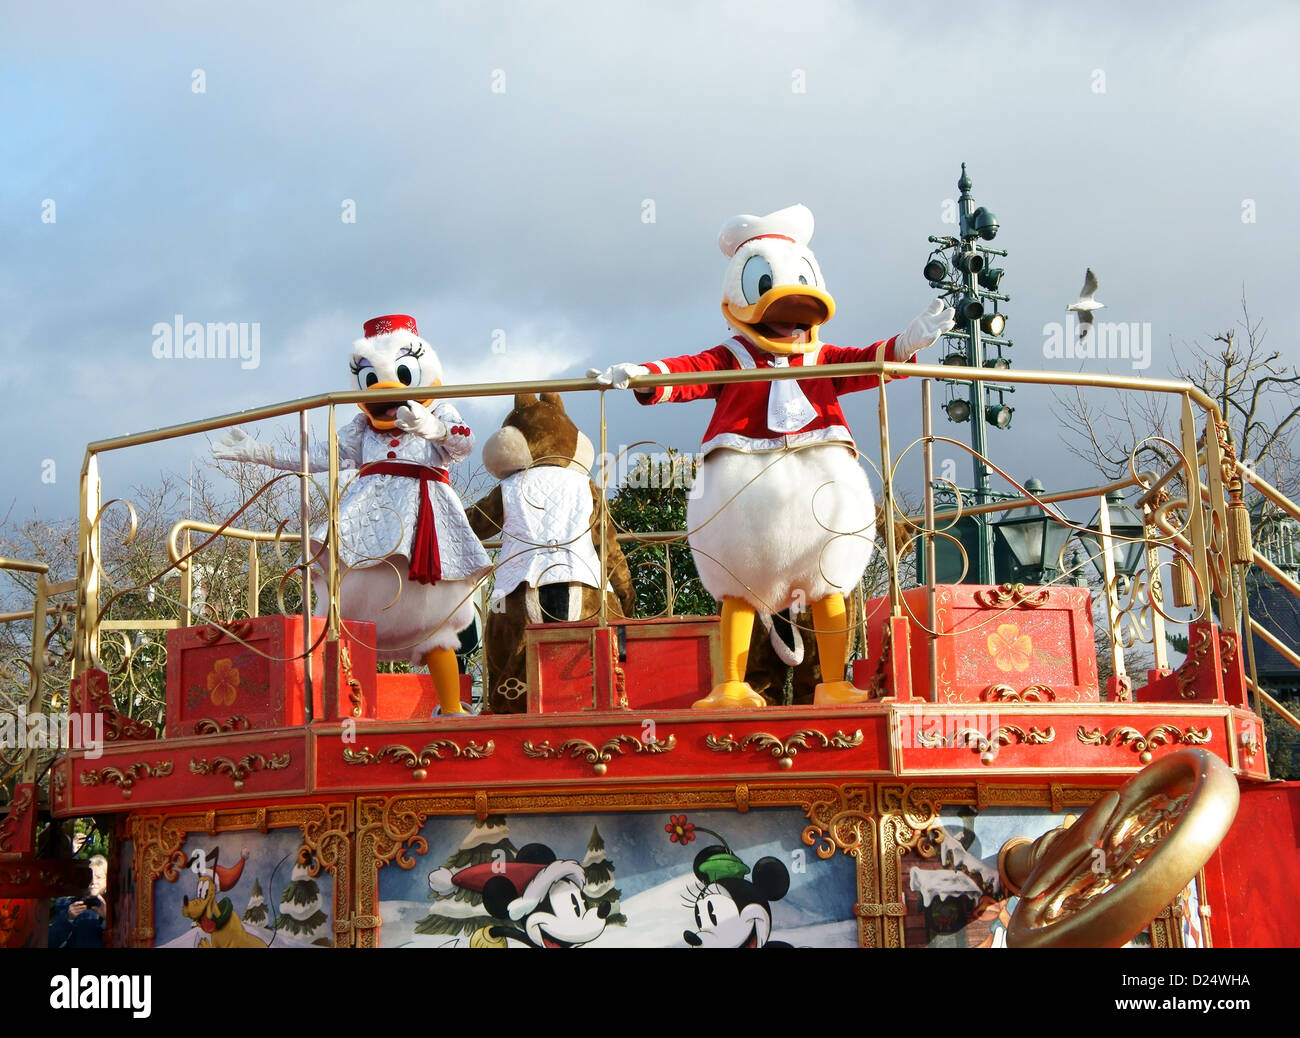 Donald and Daffy Duck in the Disney Parade in Disneyland, Paris, France Stock Photo